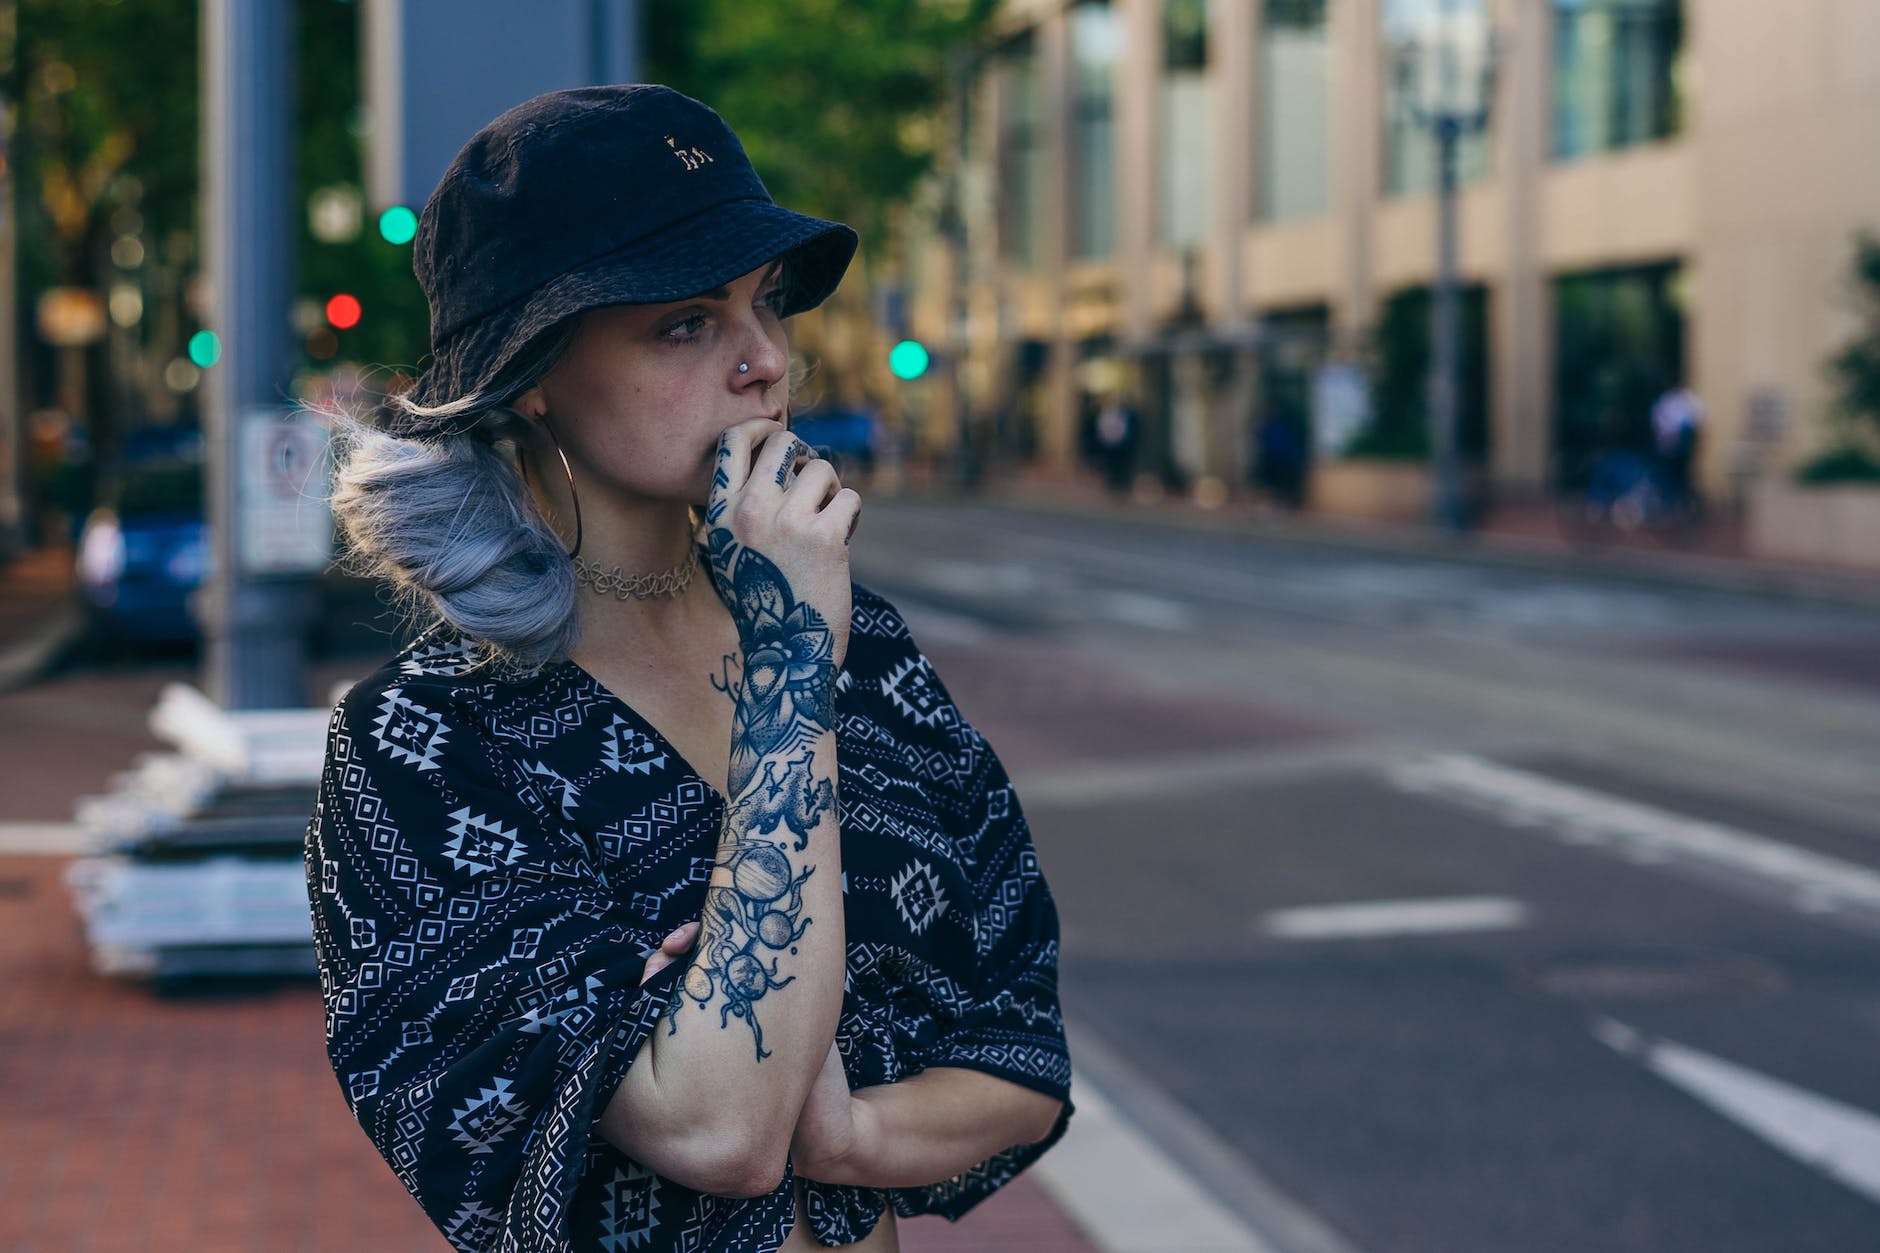 photo of Short hair woman with hats & tattoo